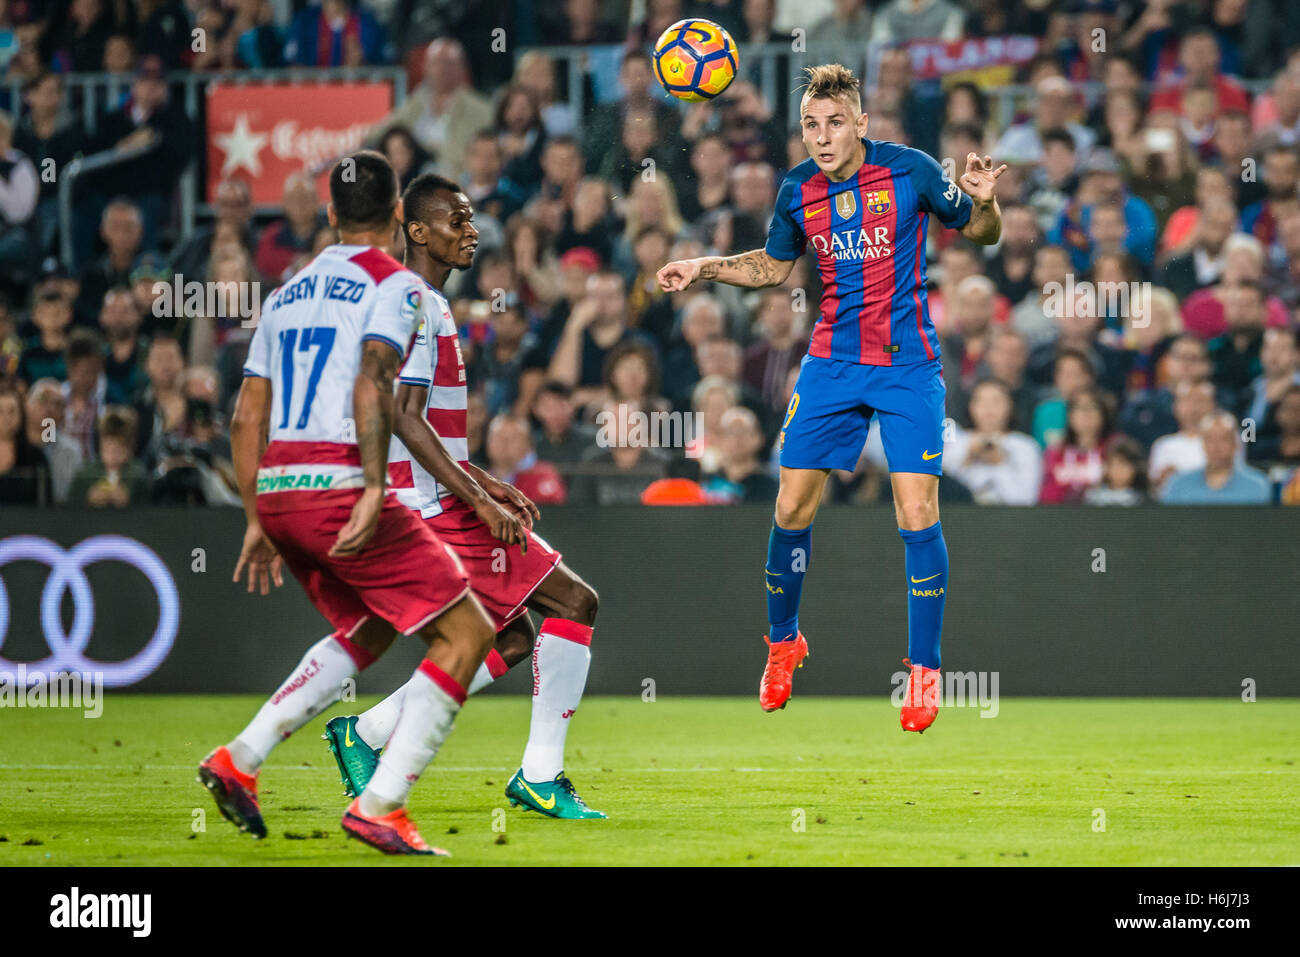 Barcelona, Catalonia, Spain. 29th Oct, 2016. FC Barcelona defender DIGNE in action in the LaLiga match between FC Barcelona and Granada CF at the Camp Nou stadium in Barcelona © Matthias Oesterle/ZUMA Wire/Alamy Live News Stock Photo